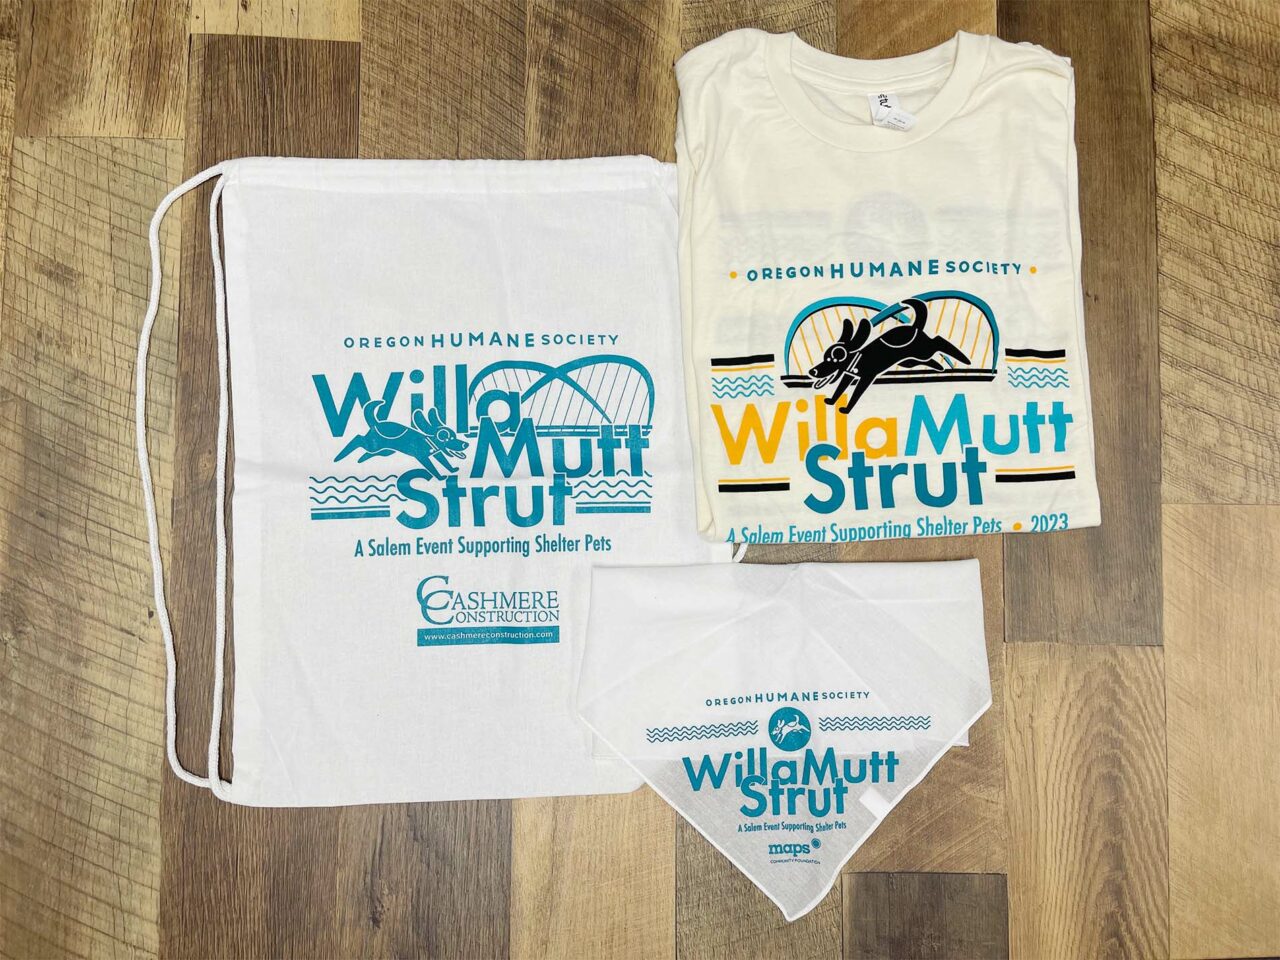 Example of Morel's promotional and apparel capabilities, showing a branded t-shirt, bandana, and backpack for the WillaMutt Strut